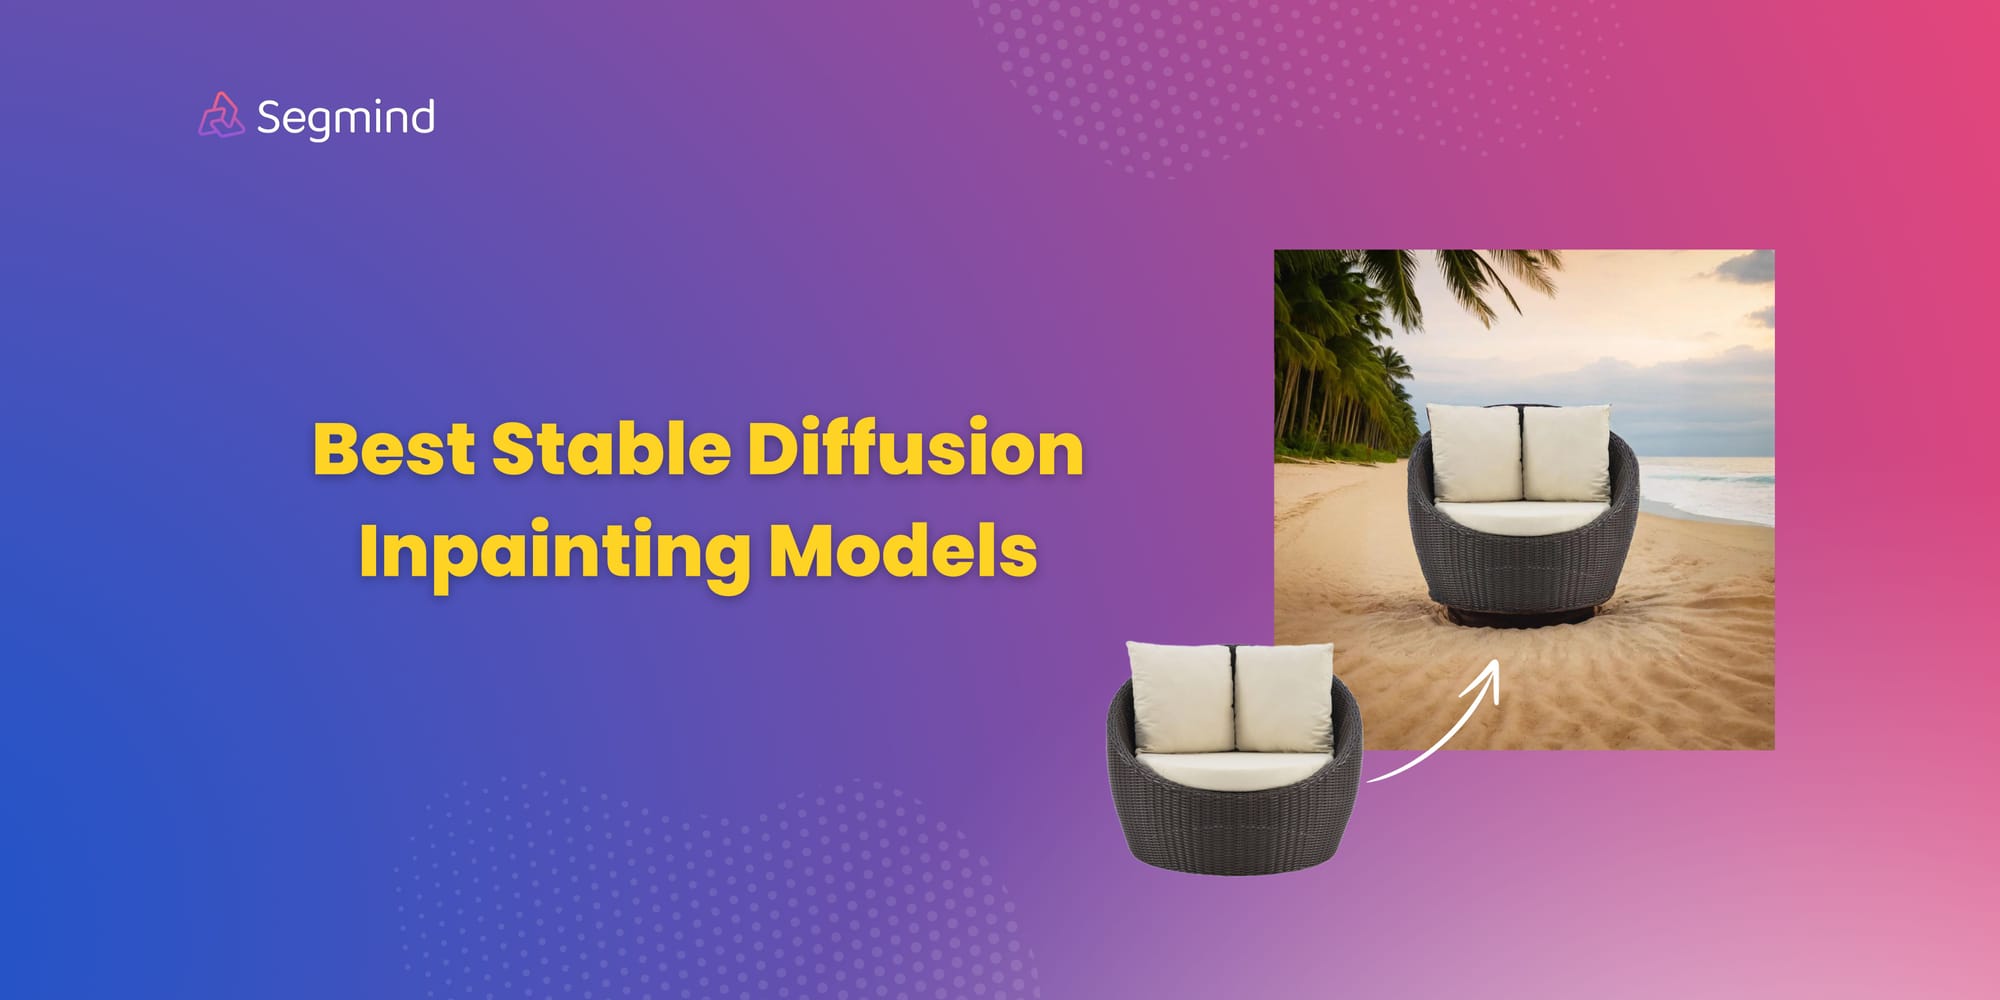 4 Best Inpainting Models in Stable Diffusion